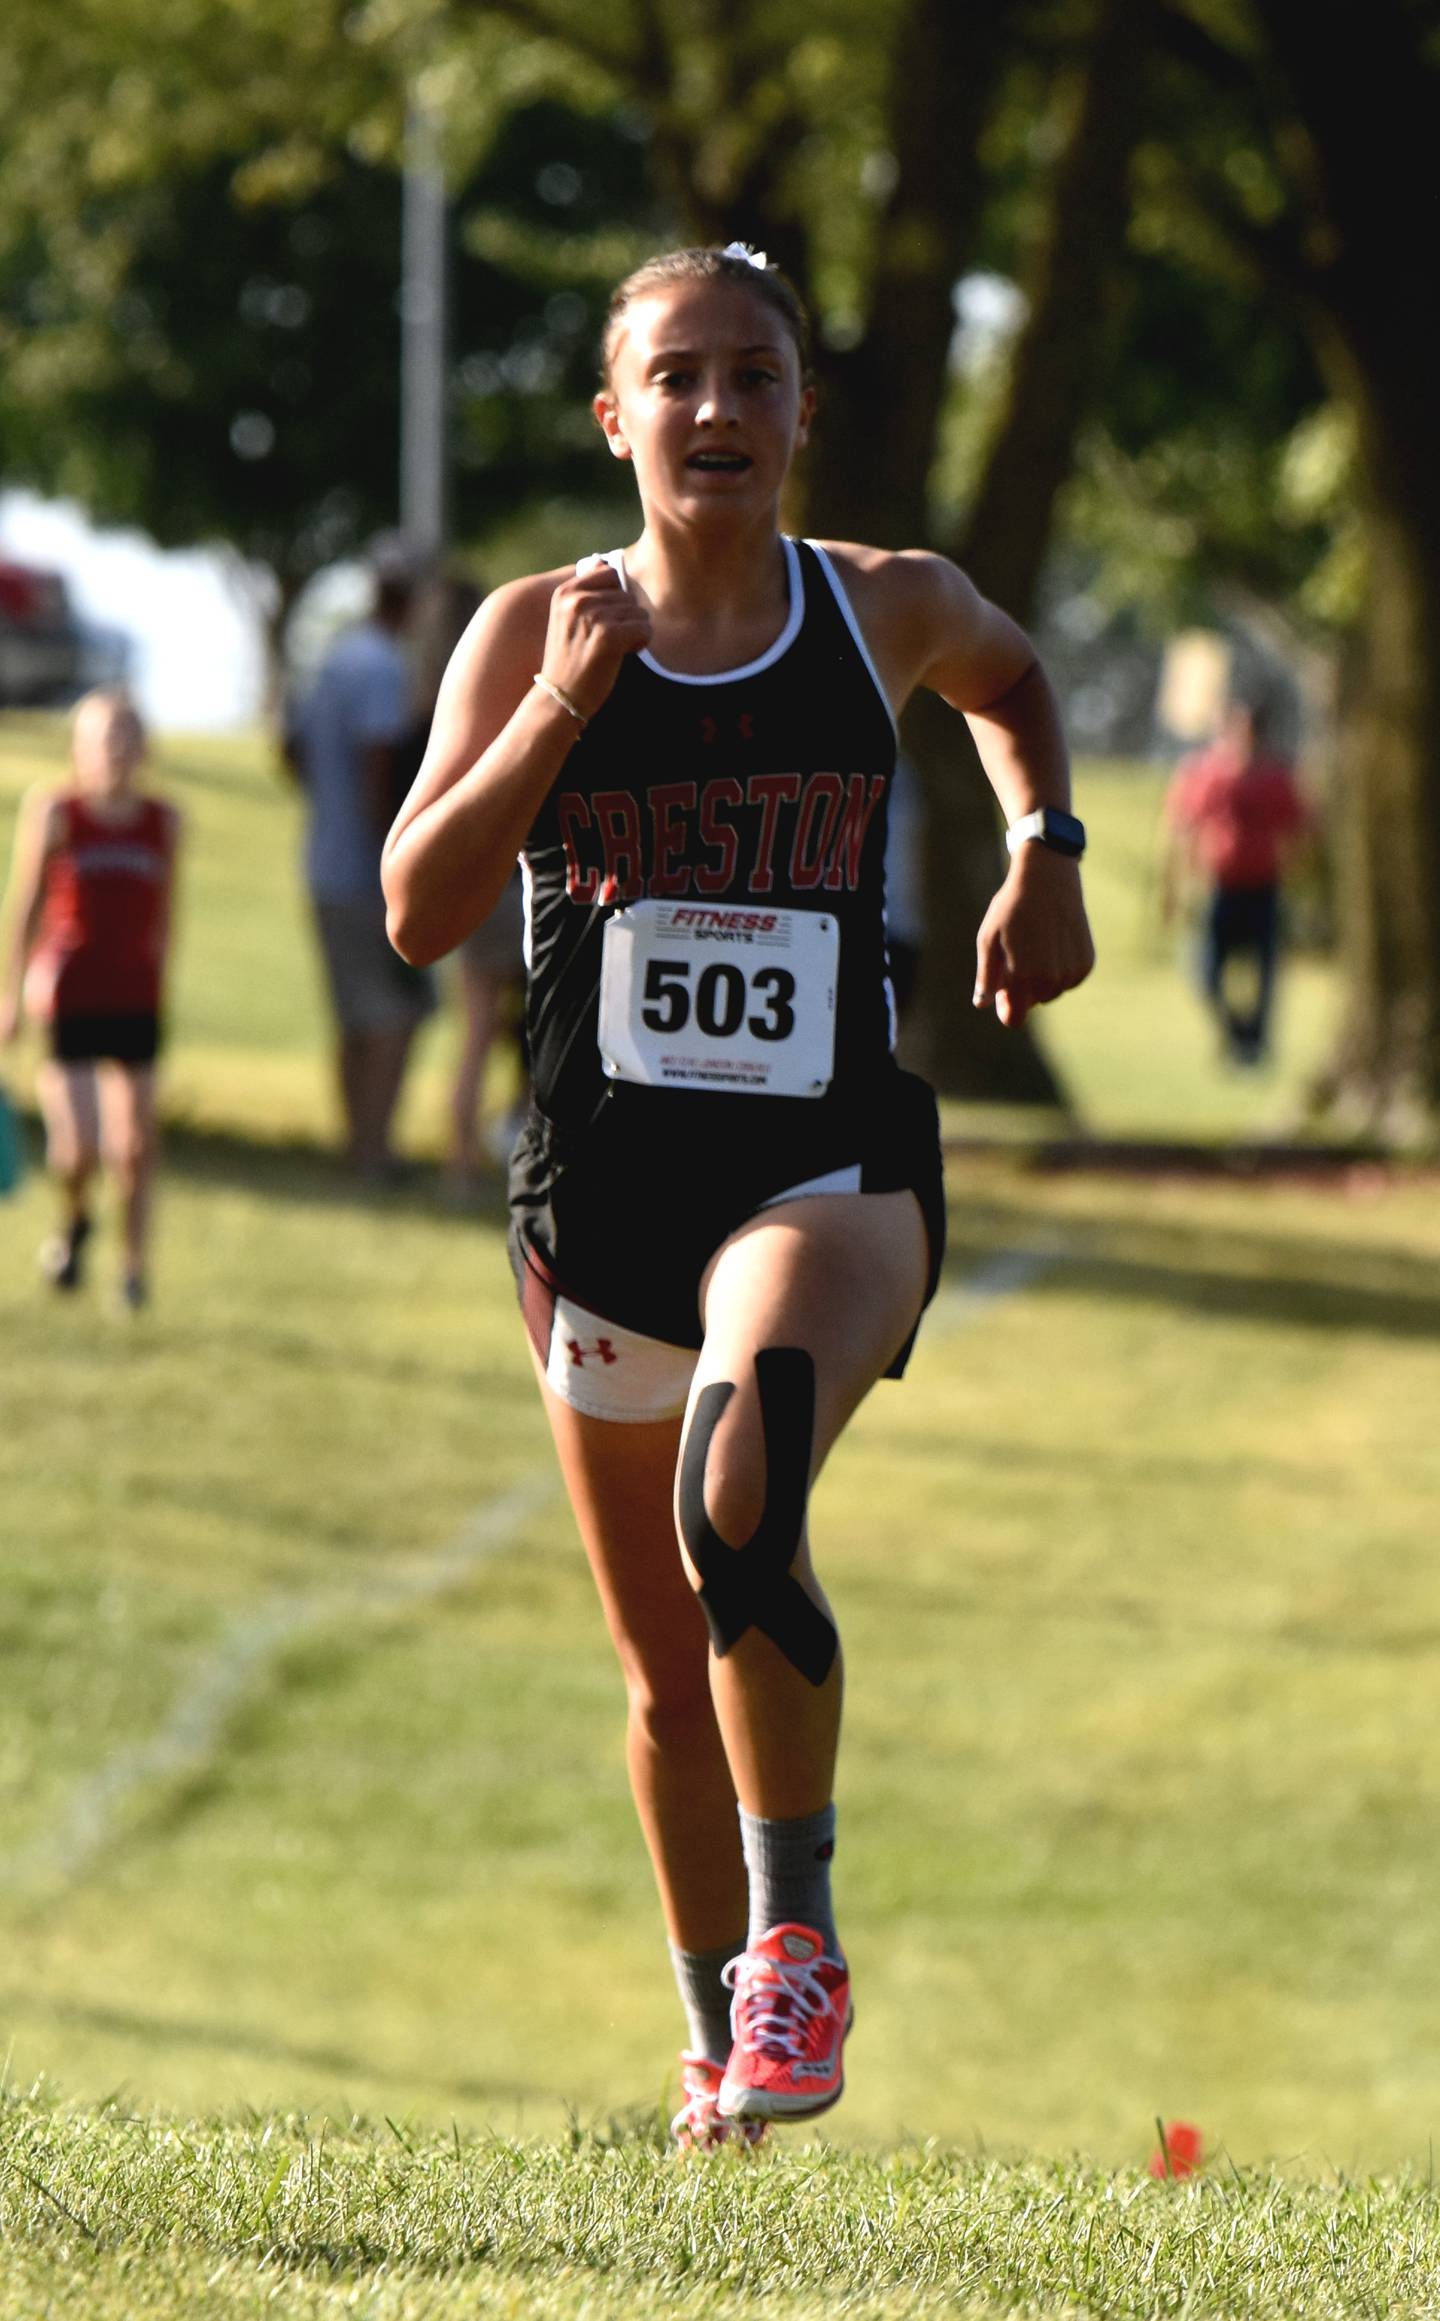 Abby Freeman earned her first medal Thursday at the I-35 Invite in Indianola with a 15th place finish.